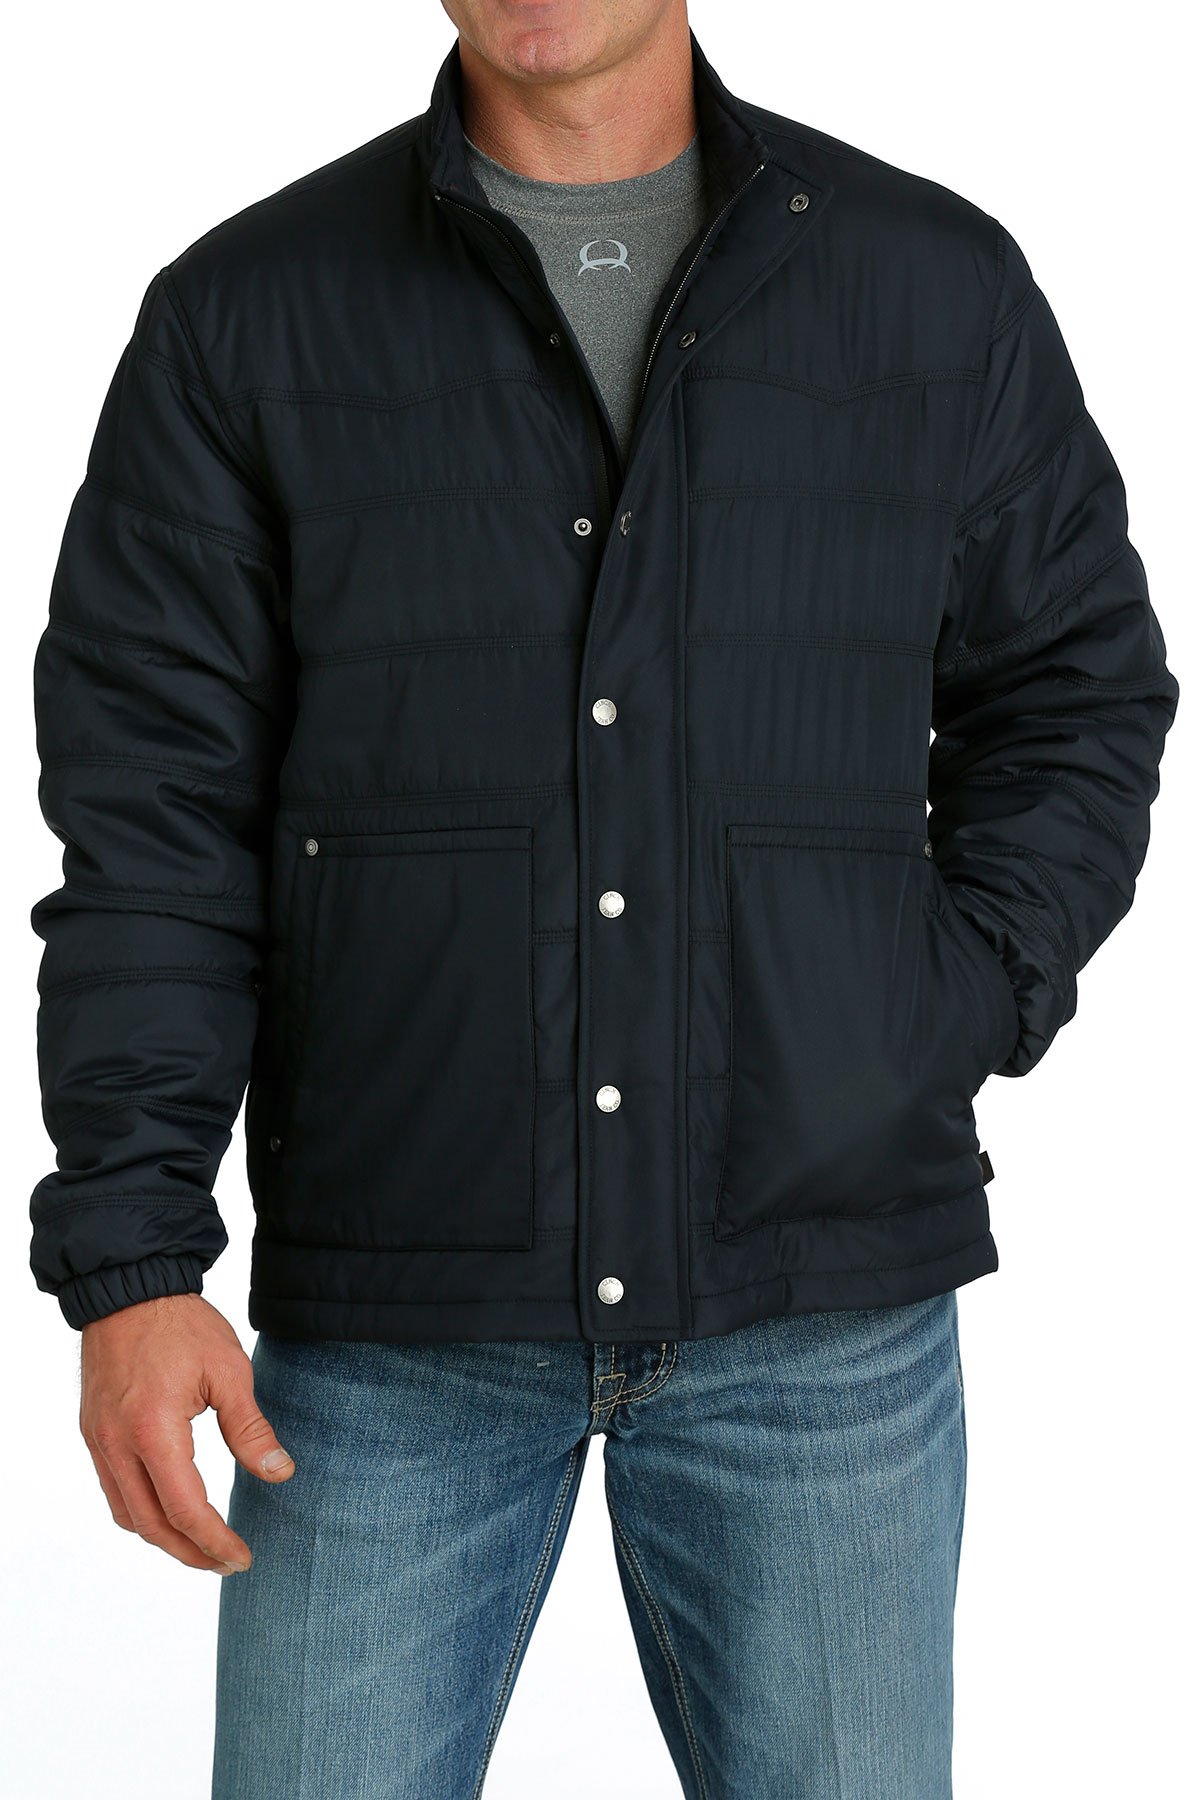 Men's Cinch Black Polyfilled Quilted Jacket 